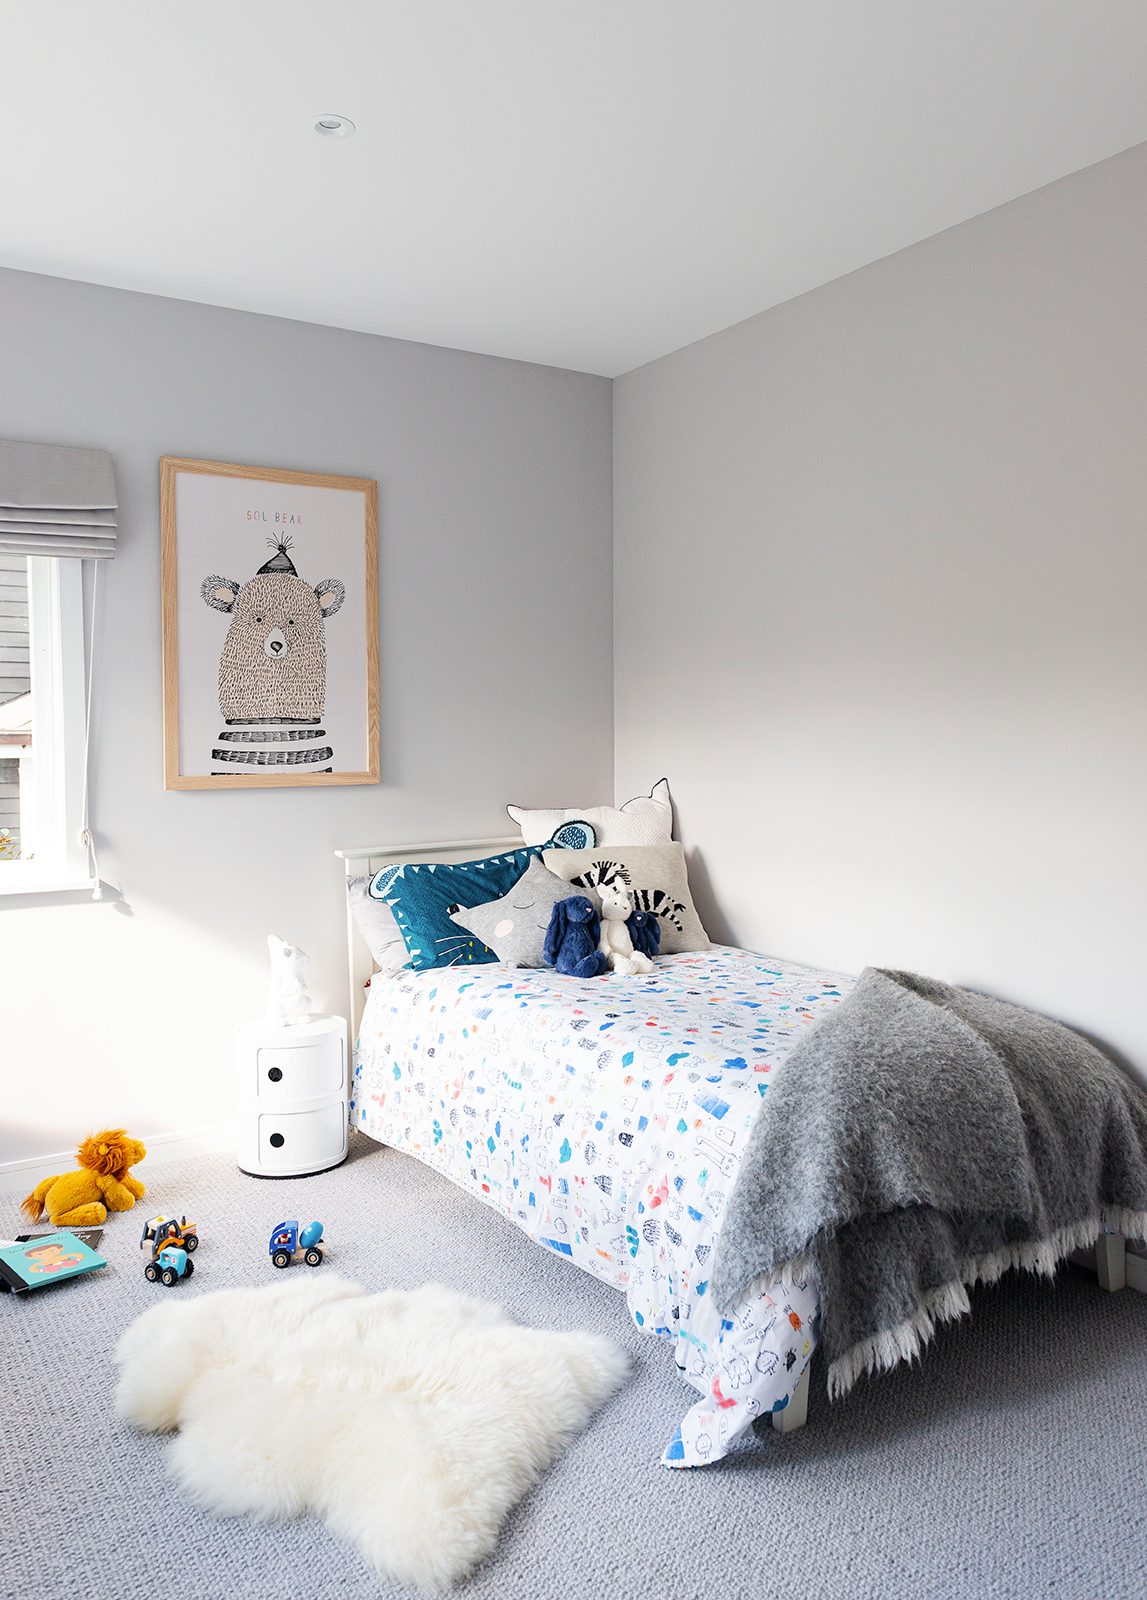 Kinds bedroom with colourful bedlinen, sheepskin on the floor and illustration of bear on the walls